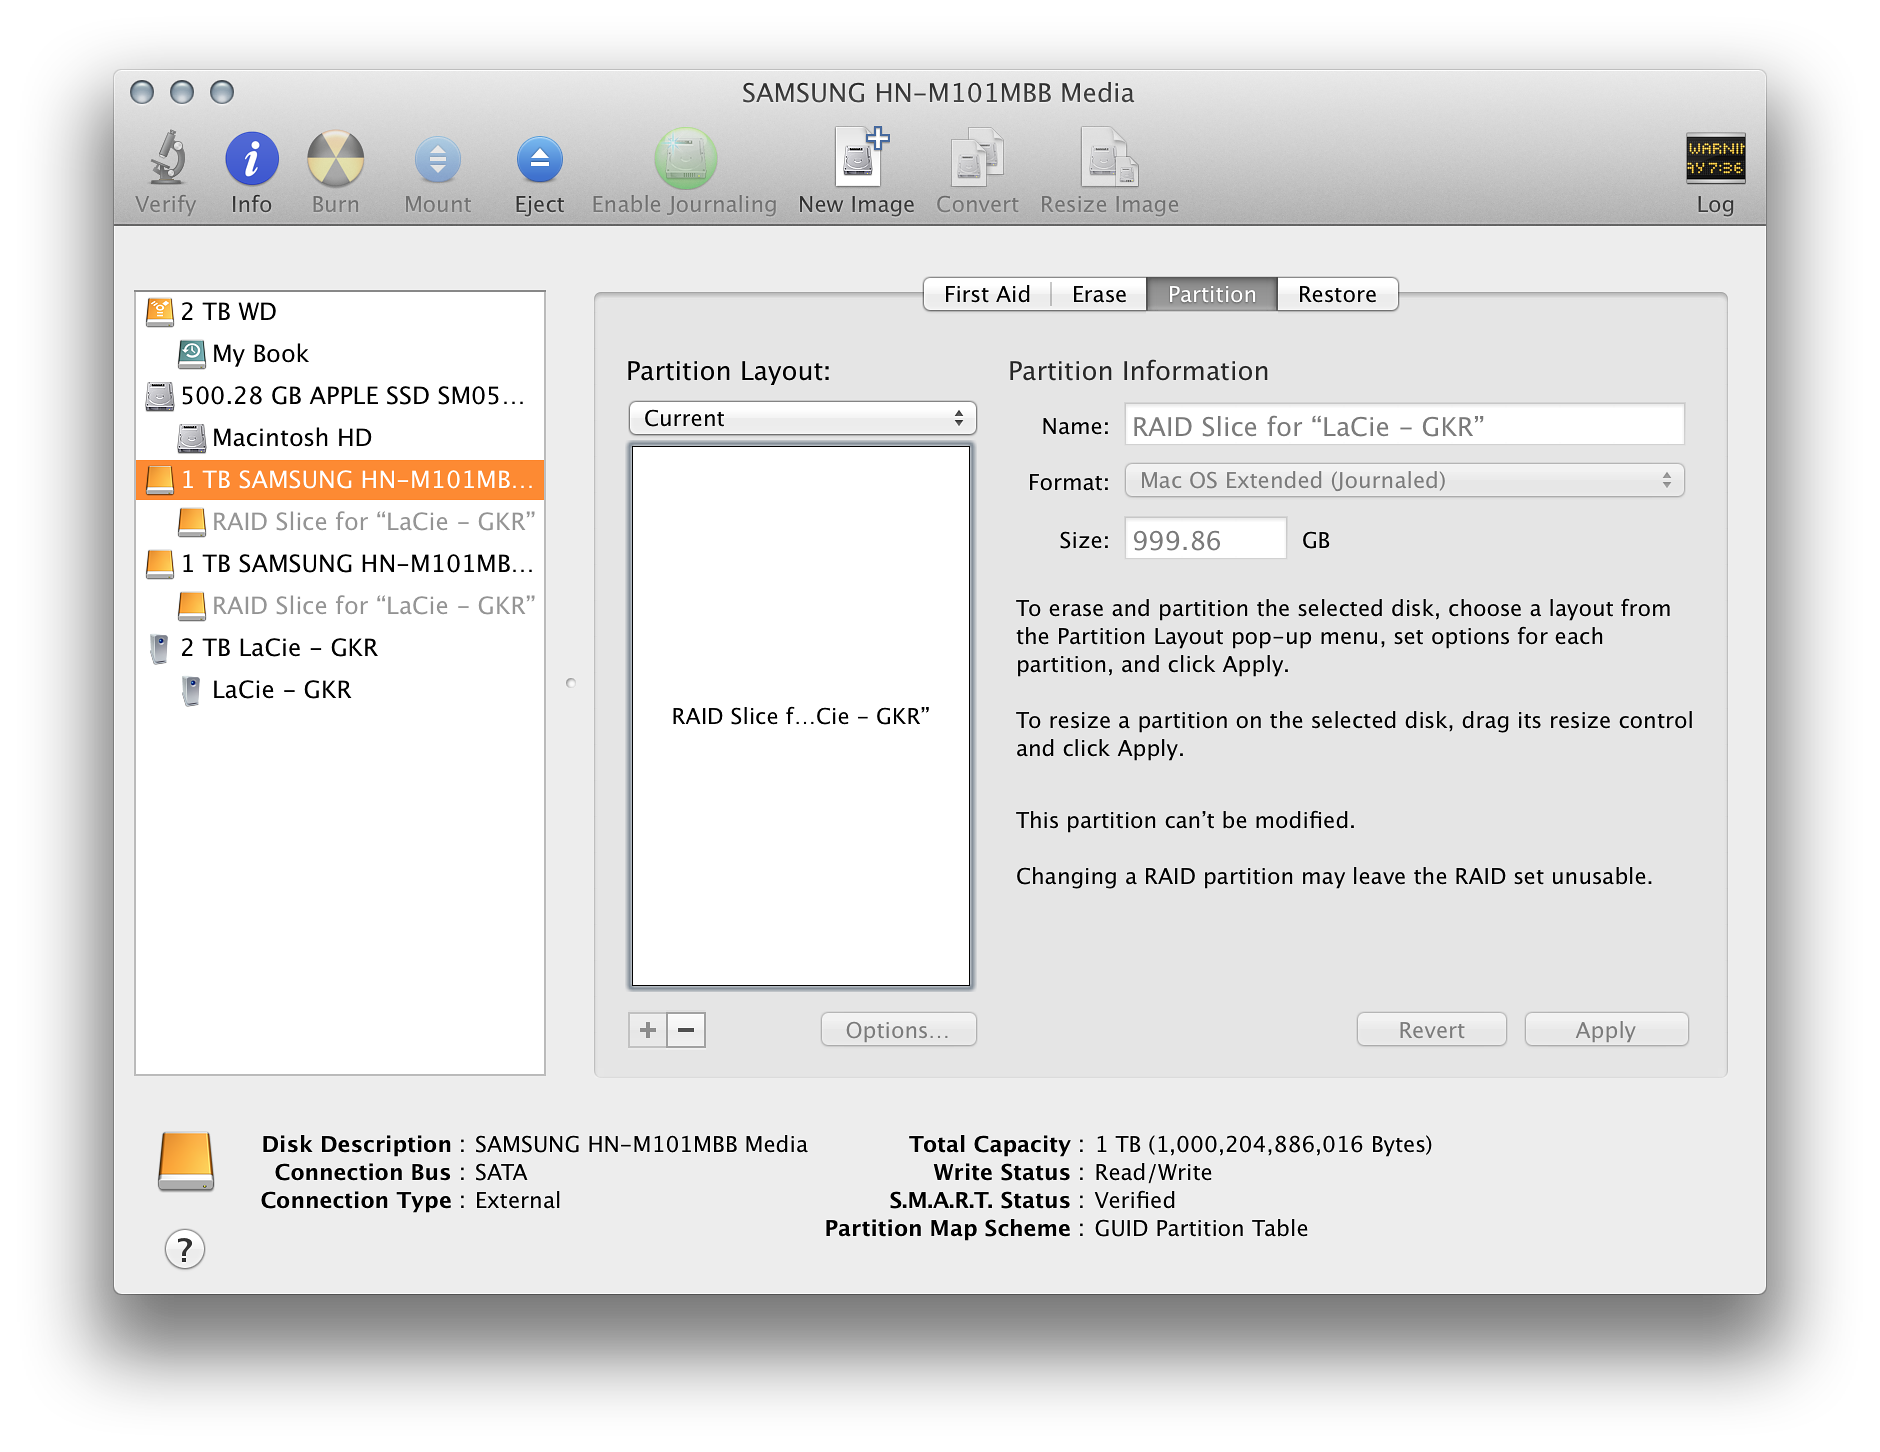 Disk Utility